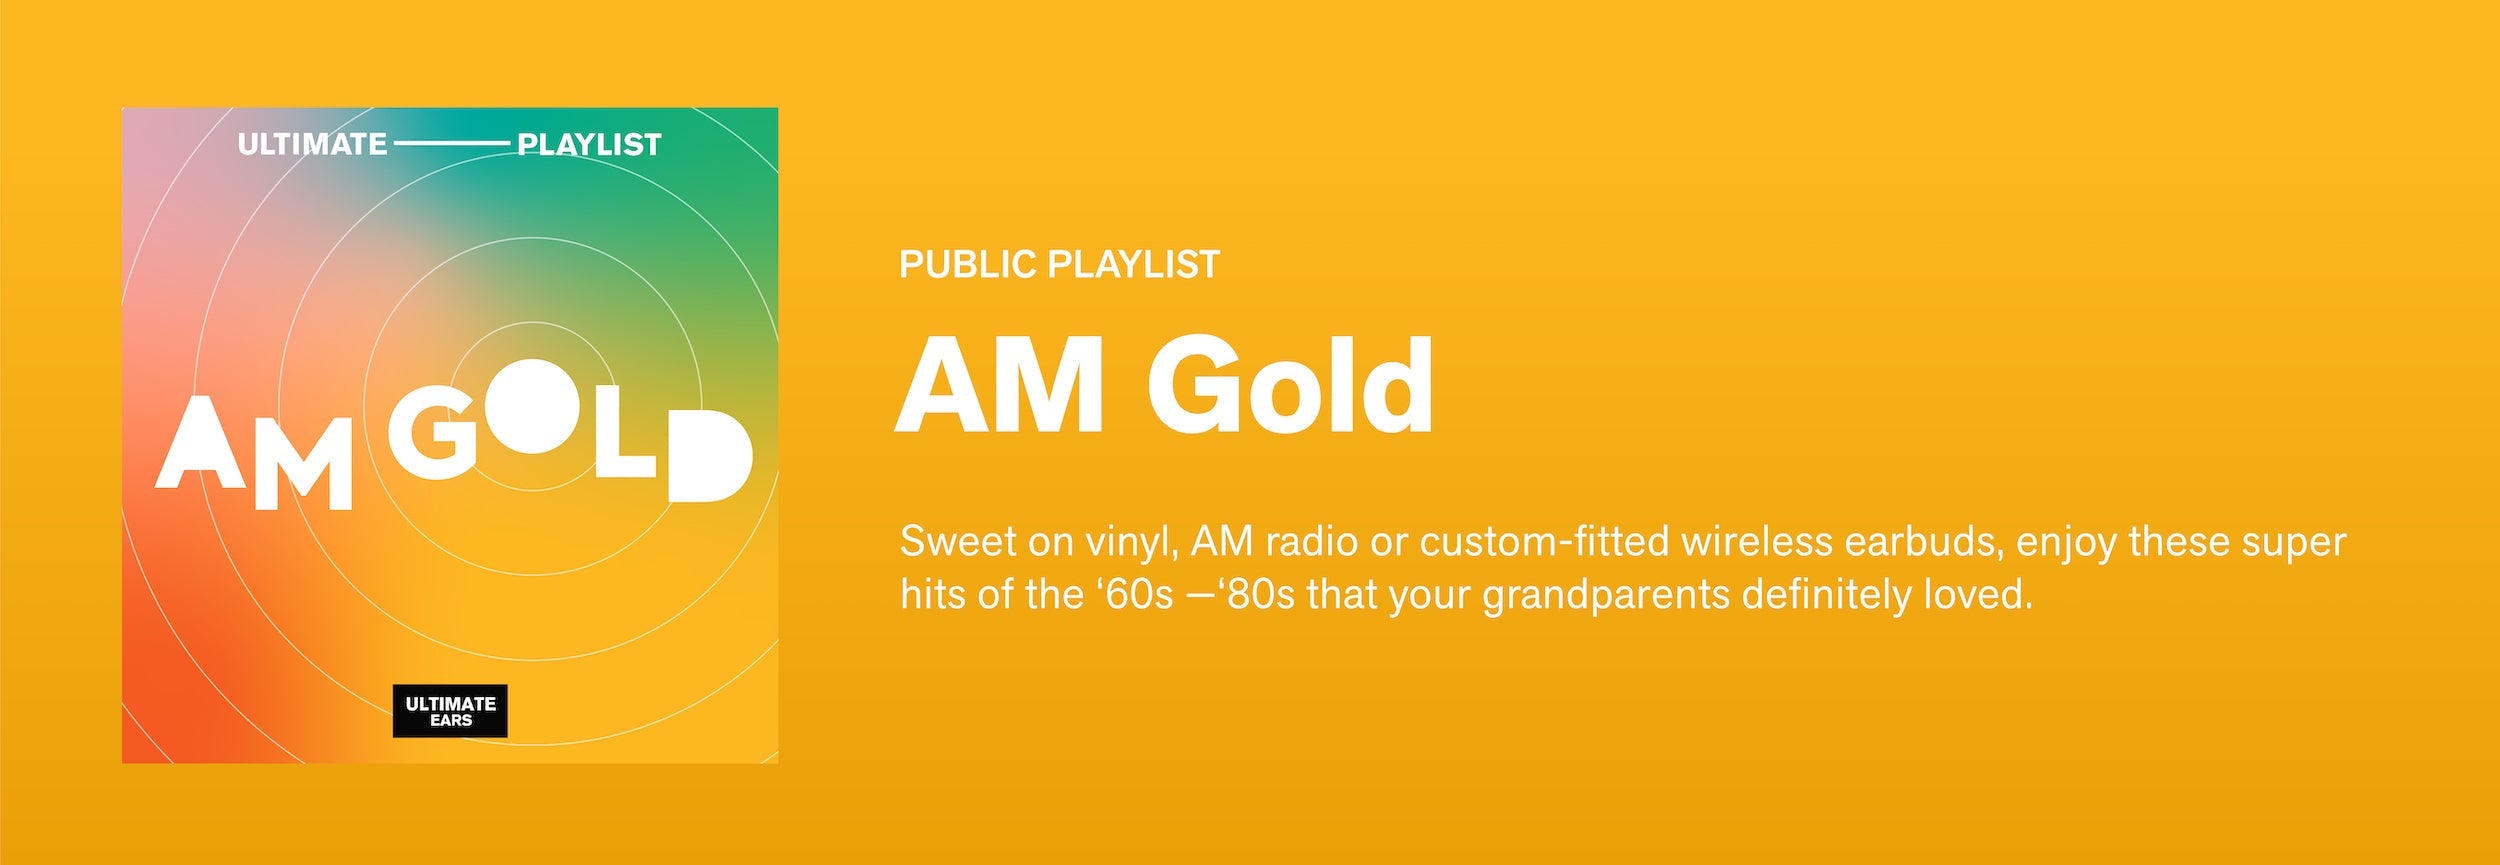 Playlist: AM Gold for National Grandparents Day